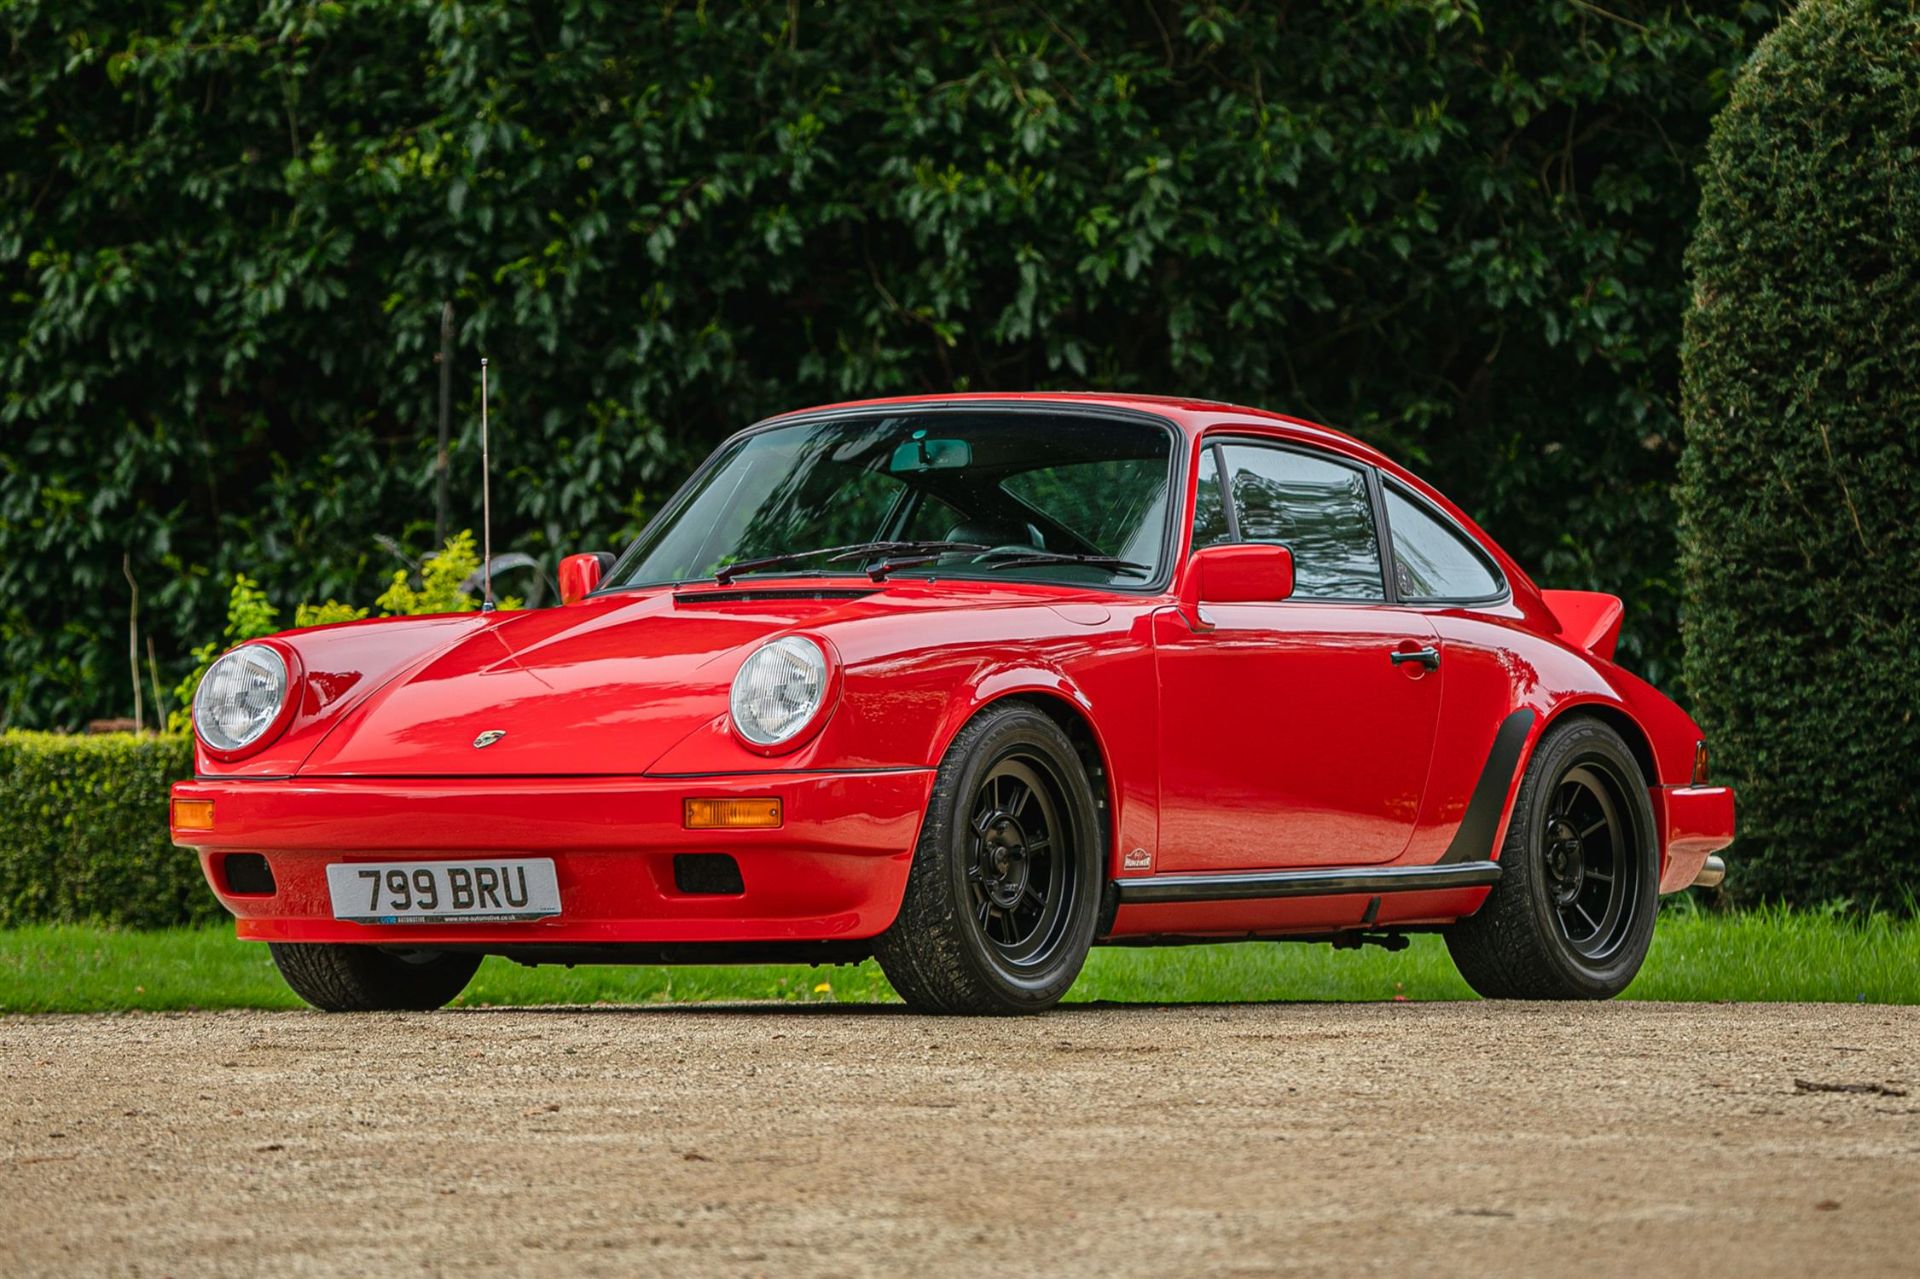 **Sold Pre-Sale**1982 Porsche 911 SC Restomod - Offered Directly From Mike Brewer